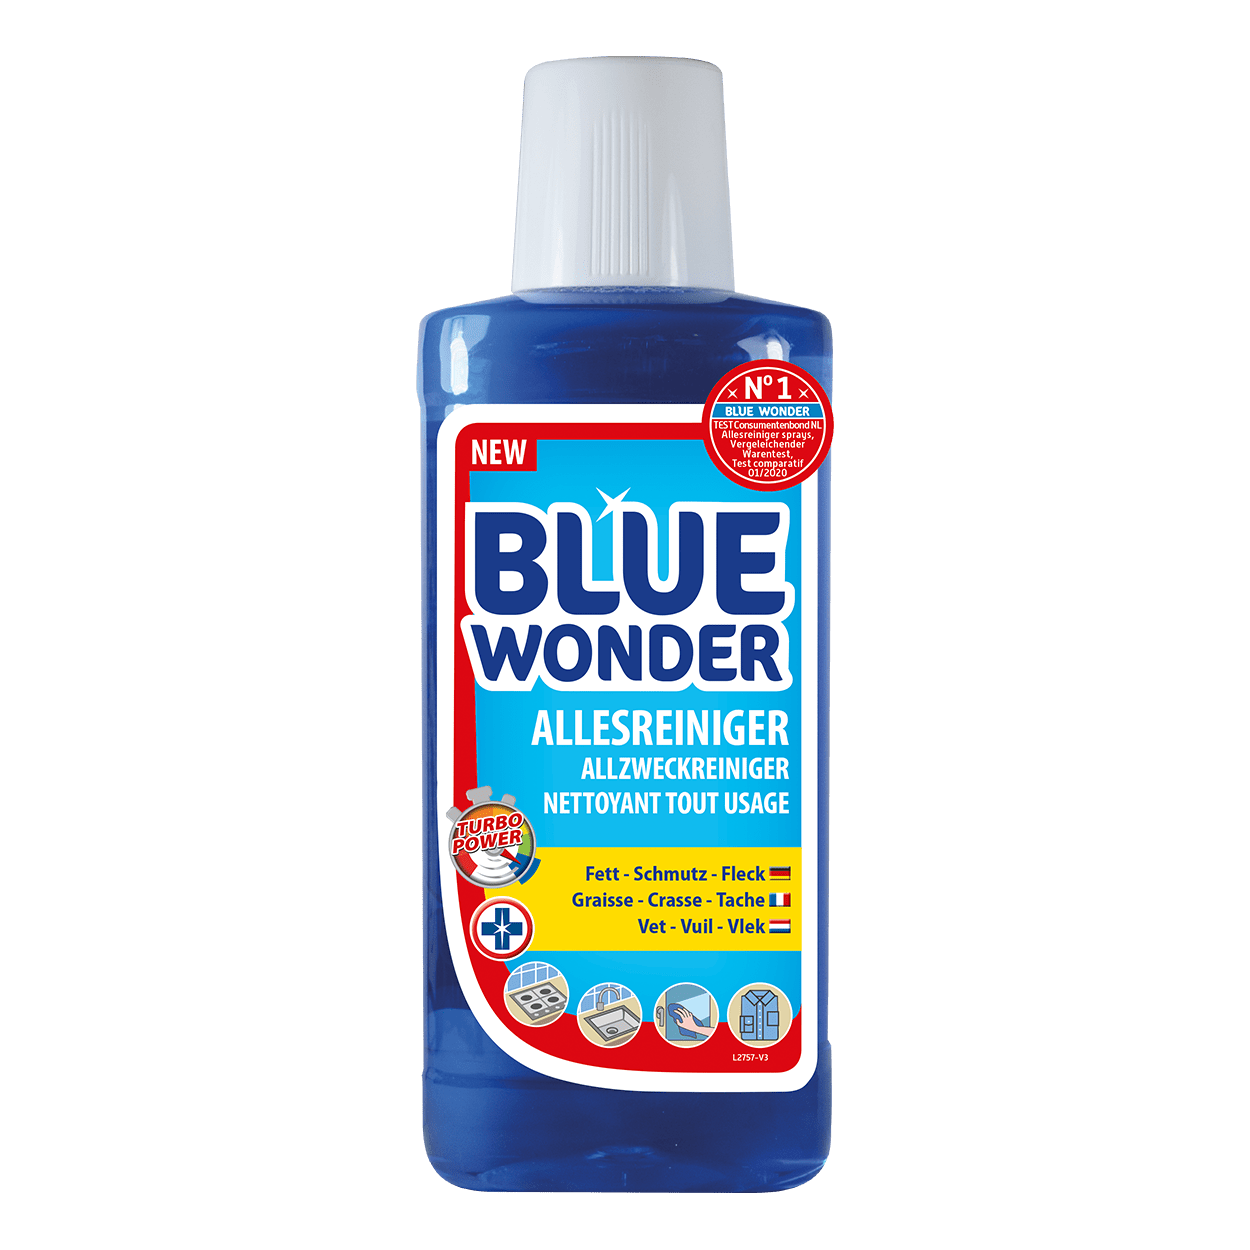 Removes grease, dirt and all kinds of stains (even from clothing). Can be used to clean doors, kitchen, bathroom, countertop, extractor hood, cupboards, windows, mirrors, car rims, wood and garden furniture, to name a few.